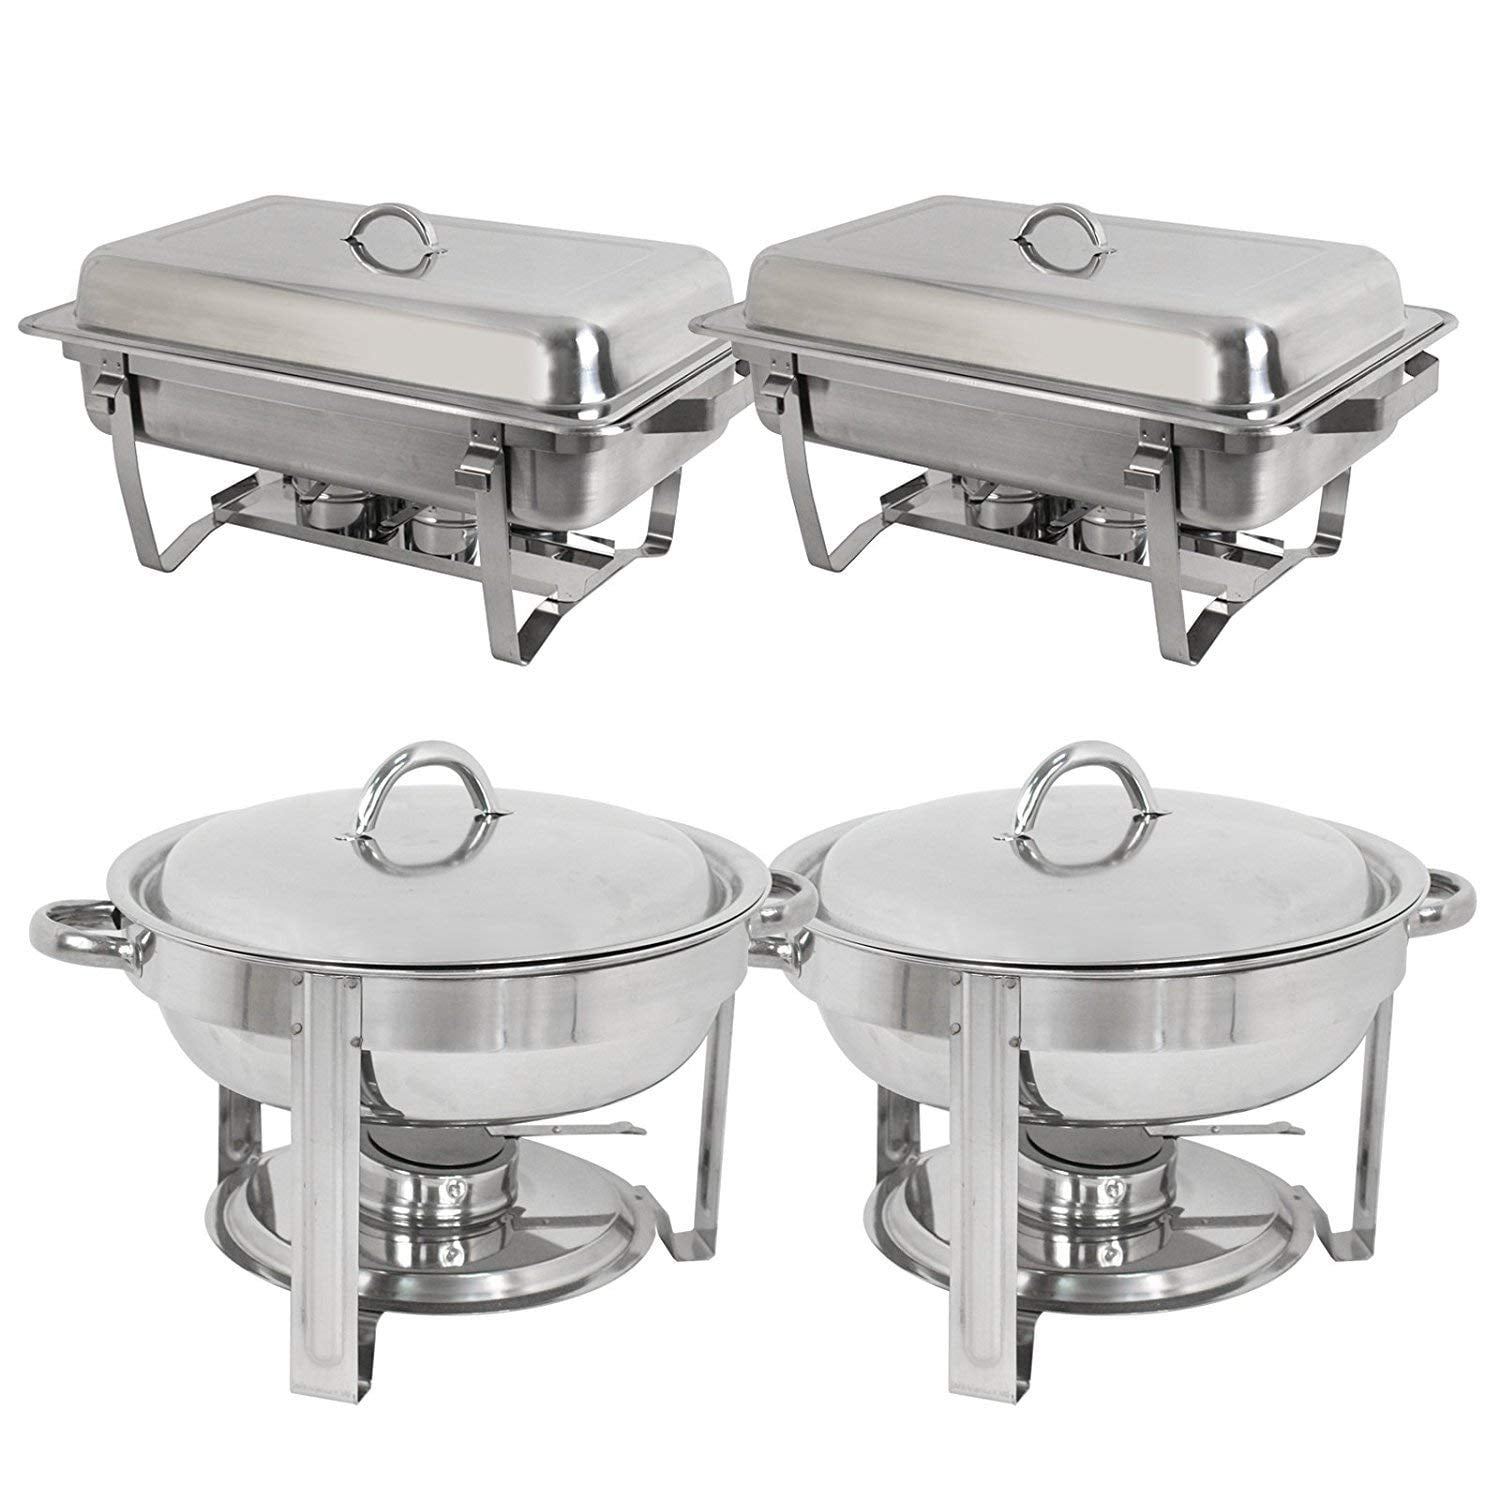 Details about   4 Pack 9L Catering Stainless Steek Chafer Chafing Dish Sets 8 QT Party Chaf NEW 